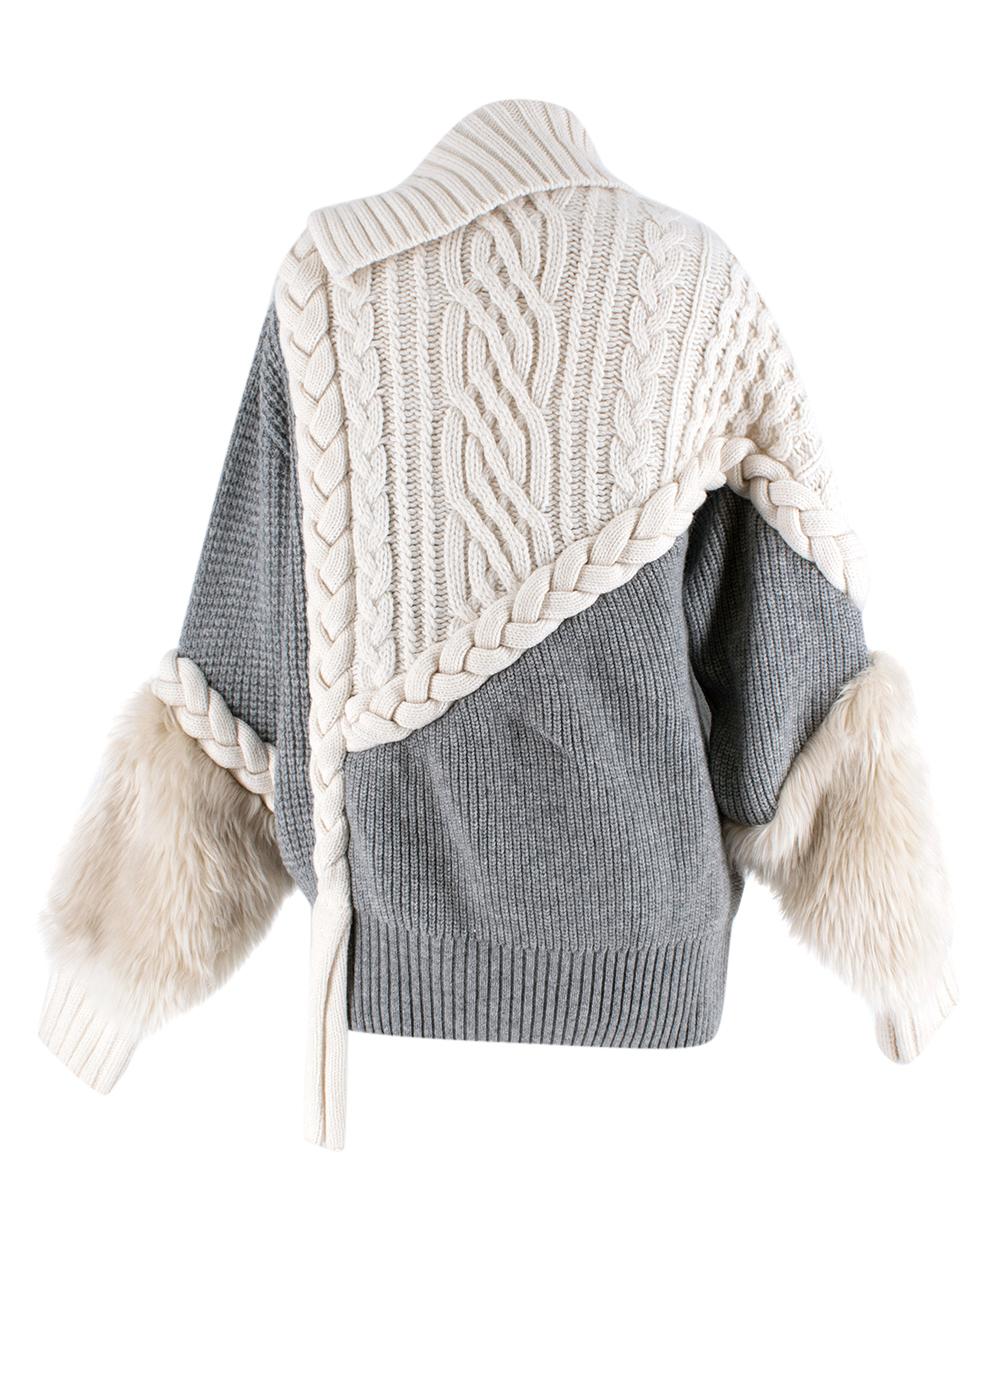 Sacai Grey Cable Knit Wool Faux Fur Cuff Zipped Jacket

- Wool cable knit detailing 
- False fur trim cuffs
- Ribbed high neck
- Exposed zip fastening at front
- Curved asymmetric hem 
- Contrast grey and cream panelling 
- Front silver metal